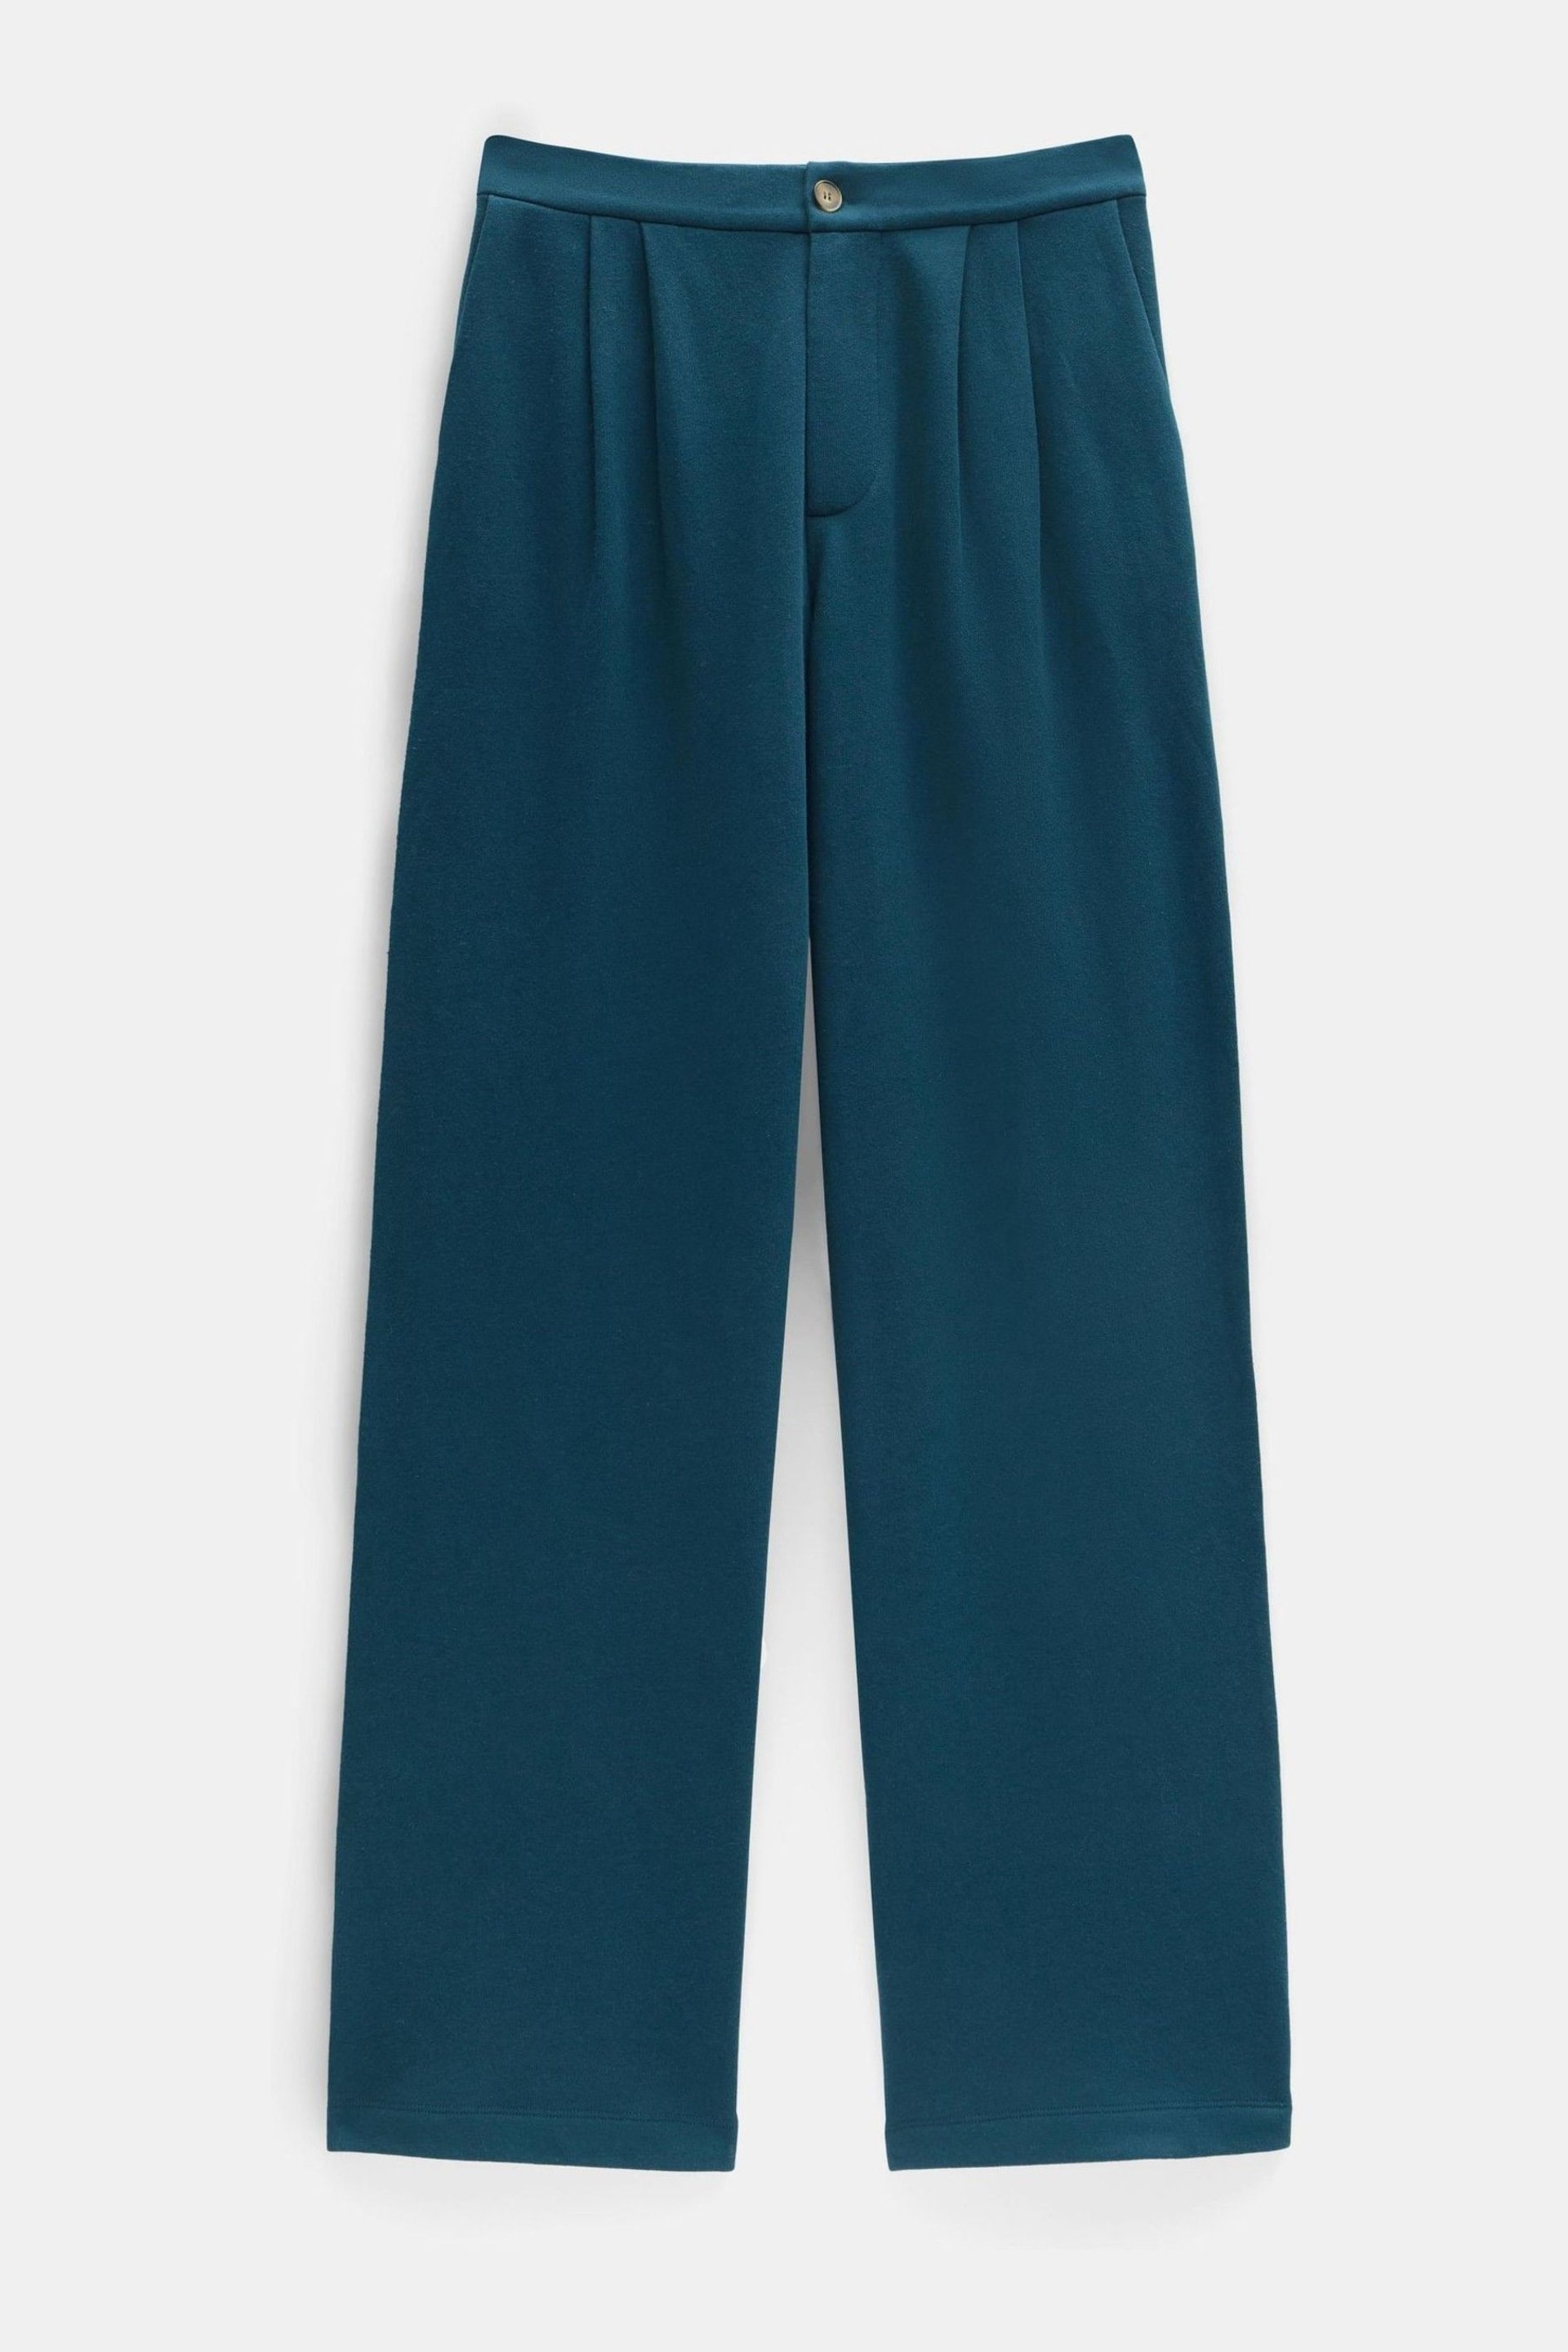 Hush Green Theo Tailored Jersey Trousers - Image 5 of 5